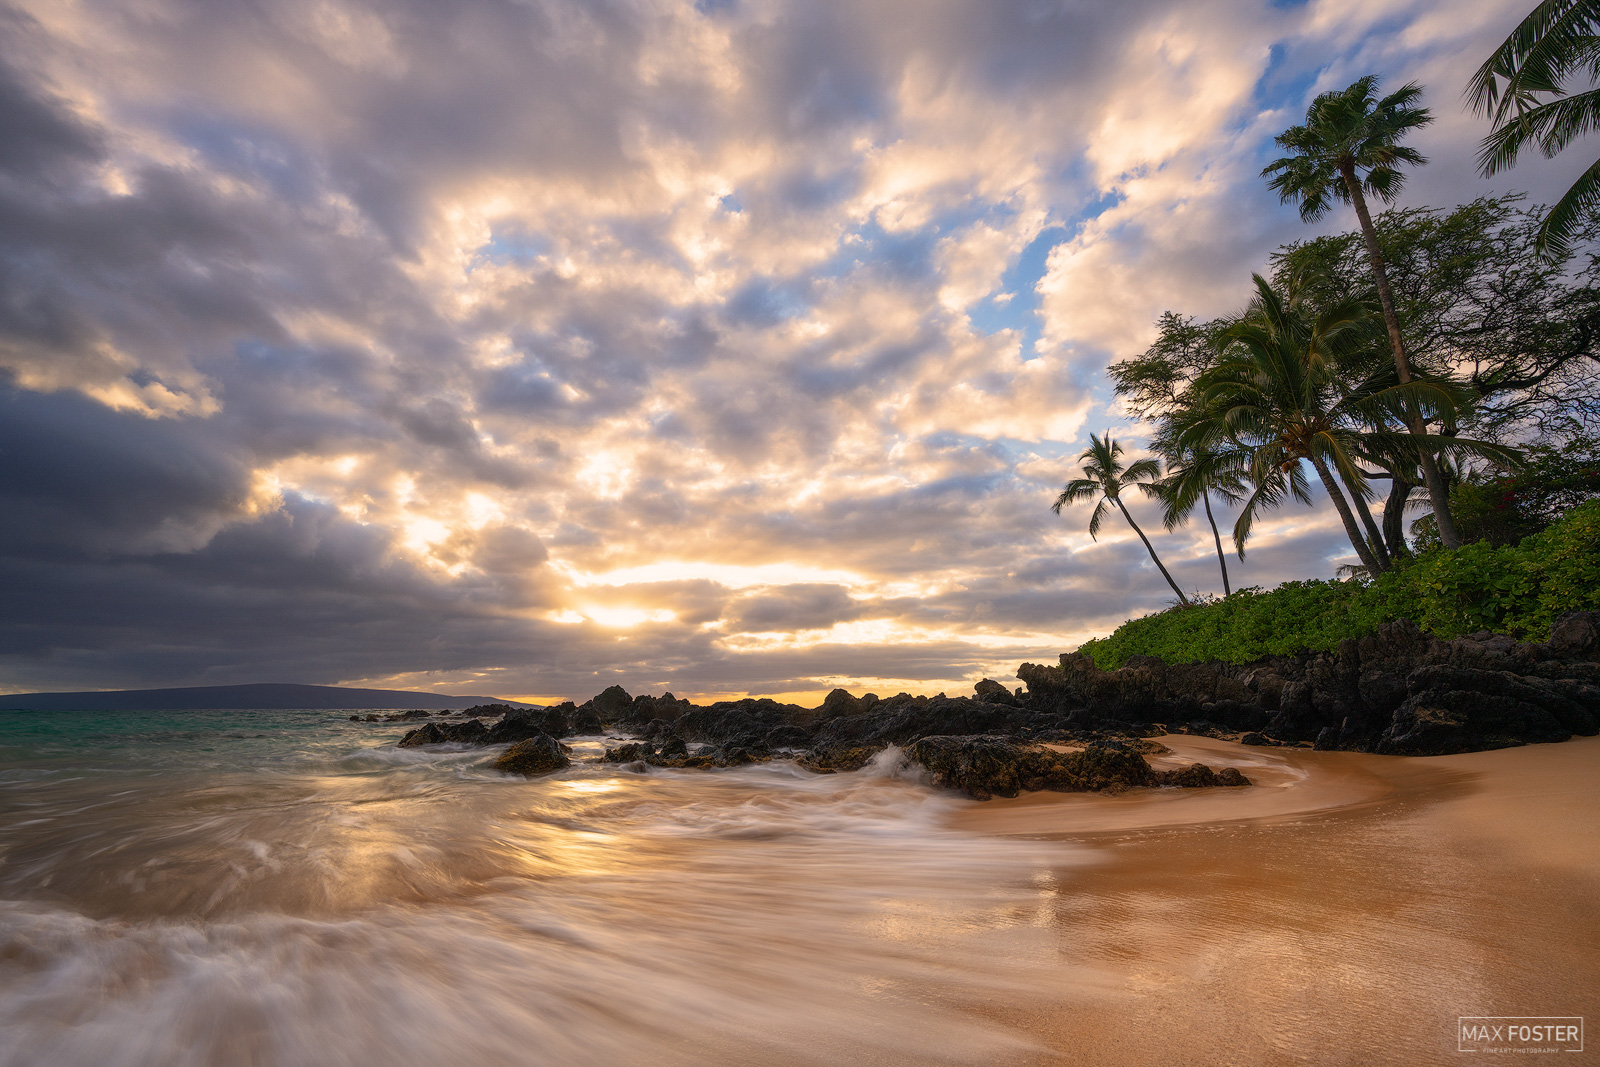 Bring nature into your home with Tropical Aria, Max Foster's limited edition photography print of Makena Cove, Maui from his...